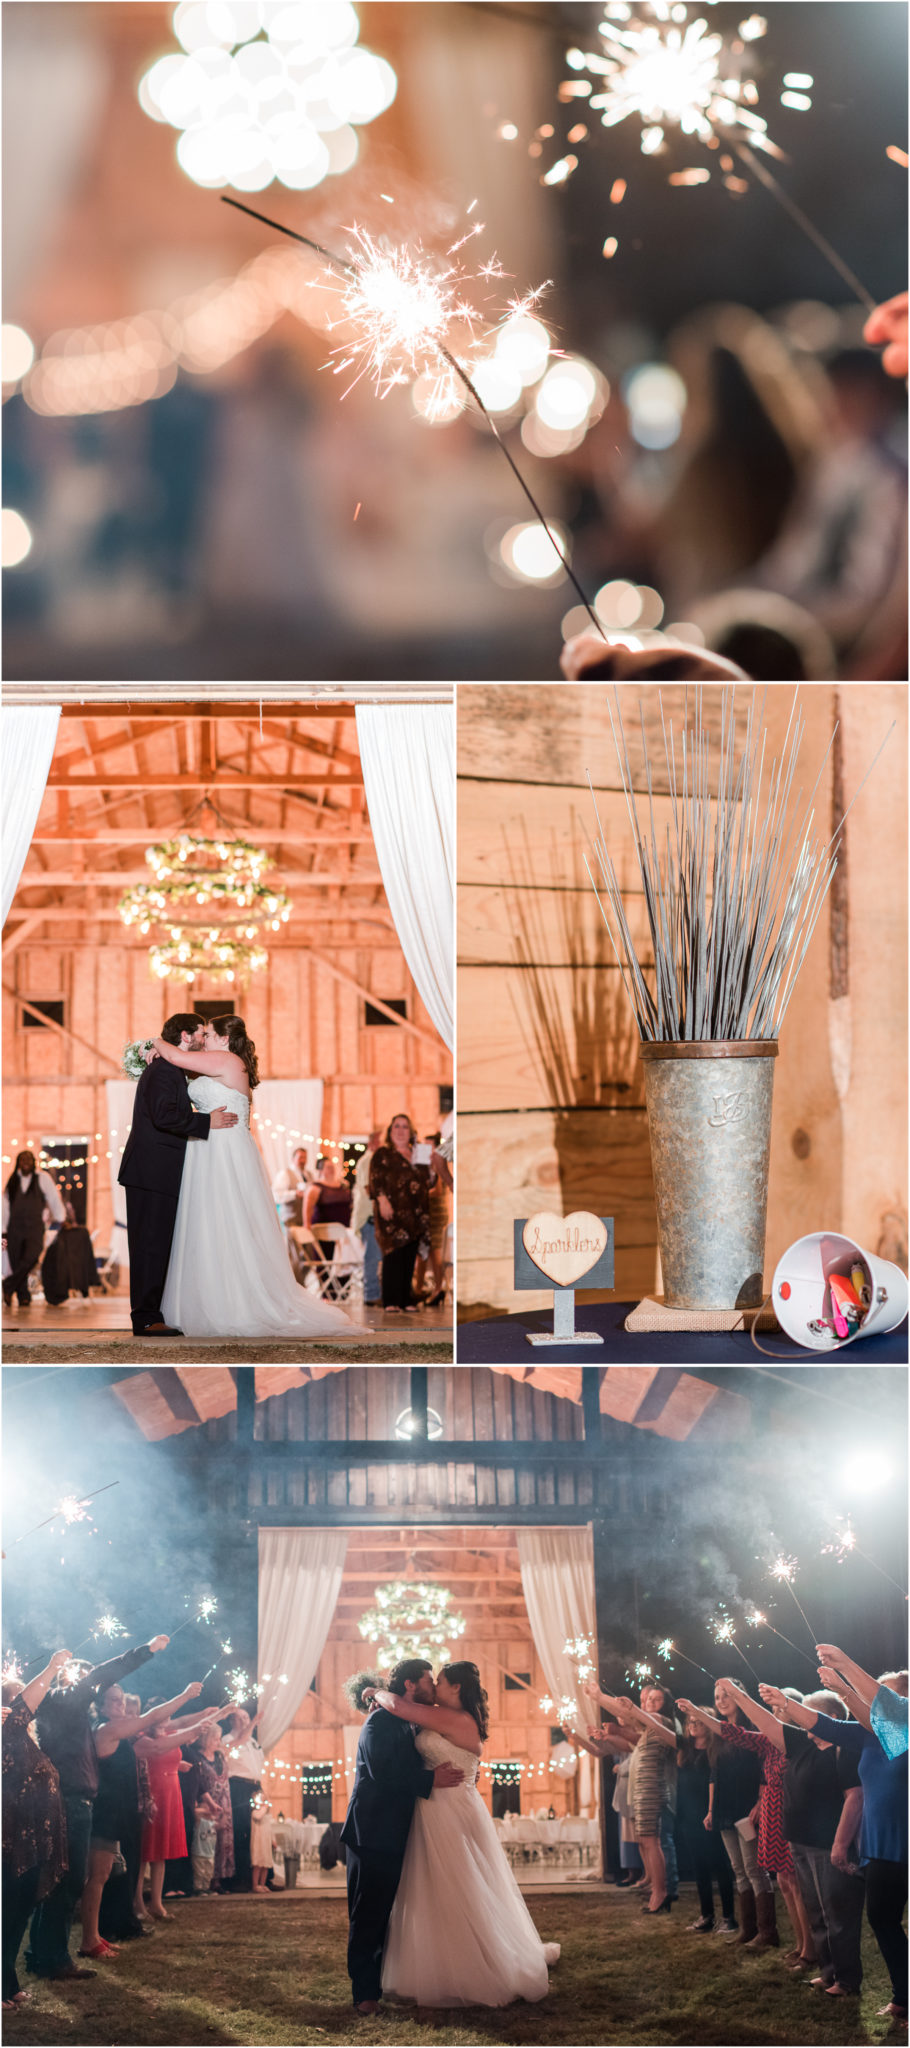 A Summer Wedding at the Barn at Greene Acres in Anderson SC Sparkler Exit